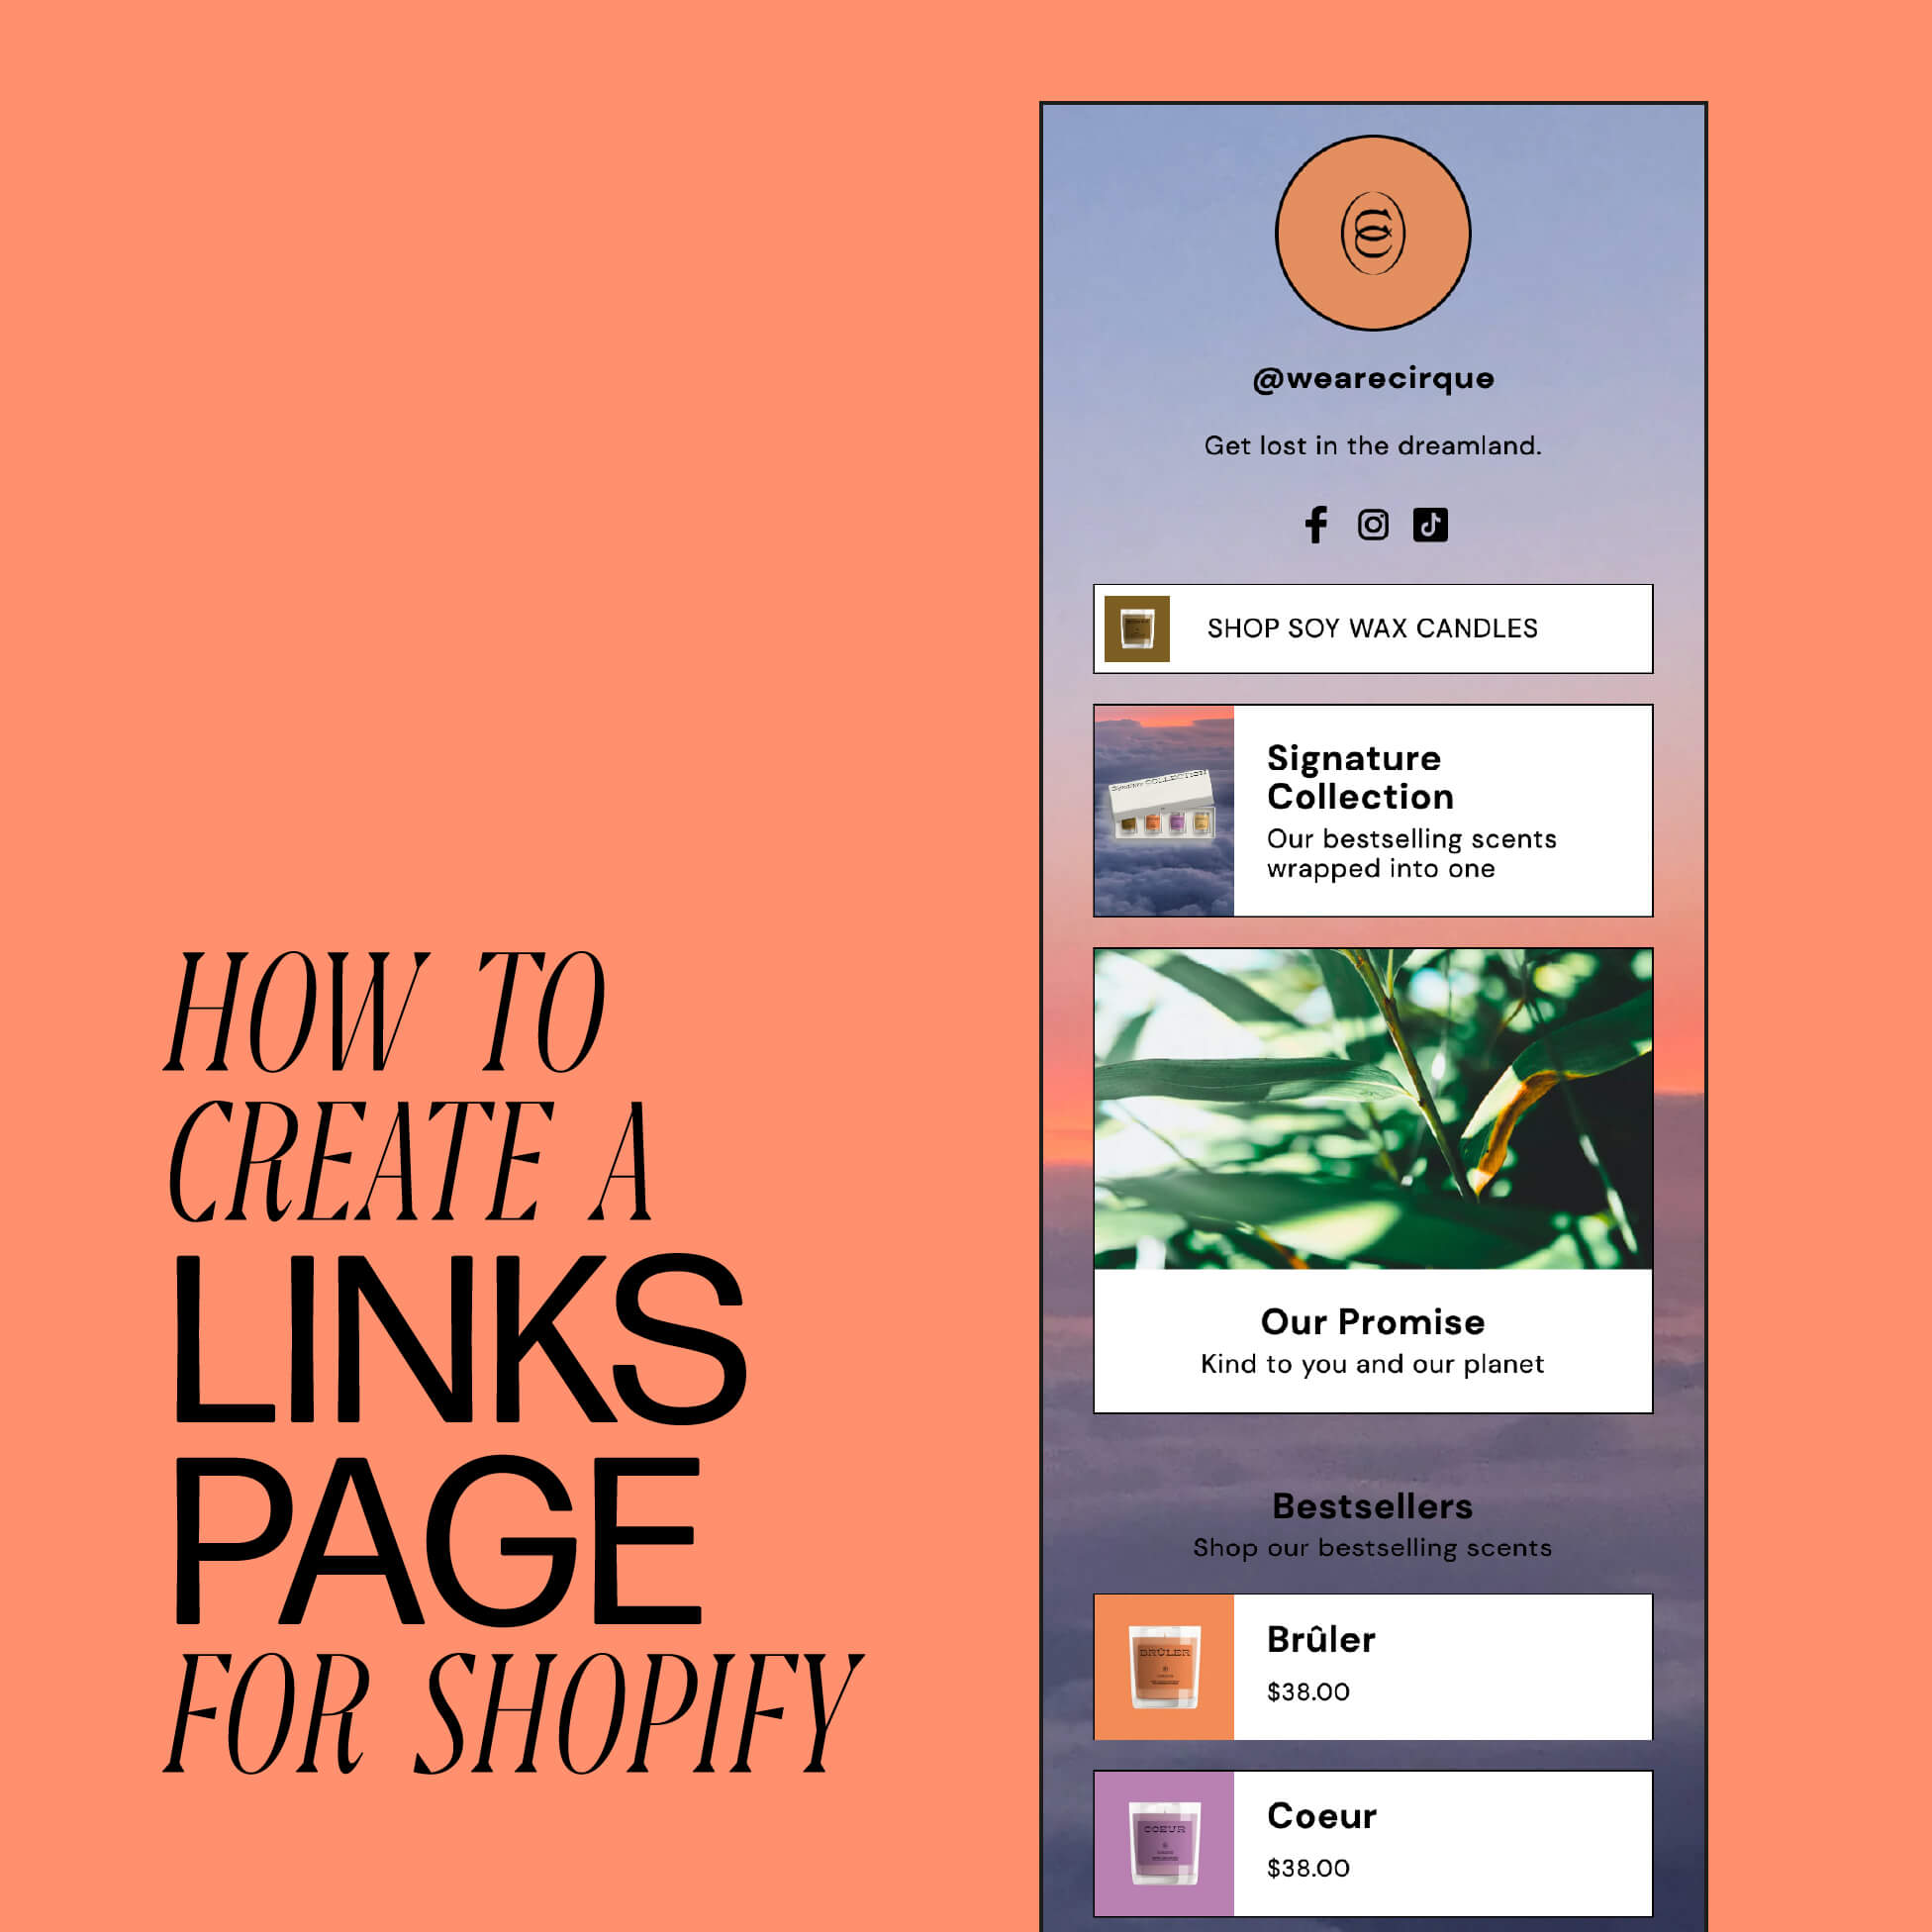 How to create a links page for Shopify